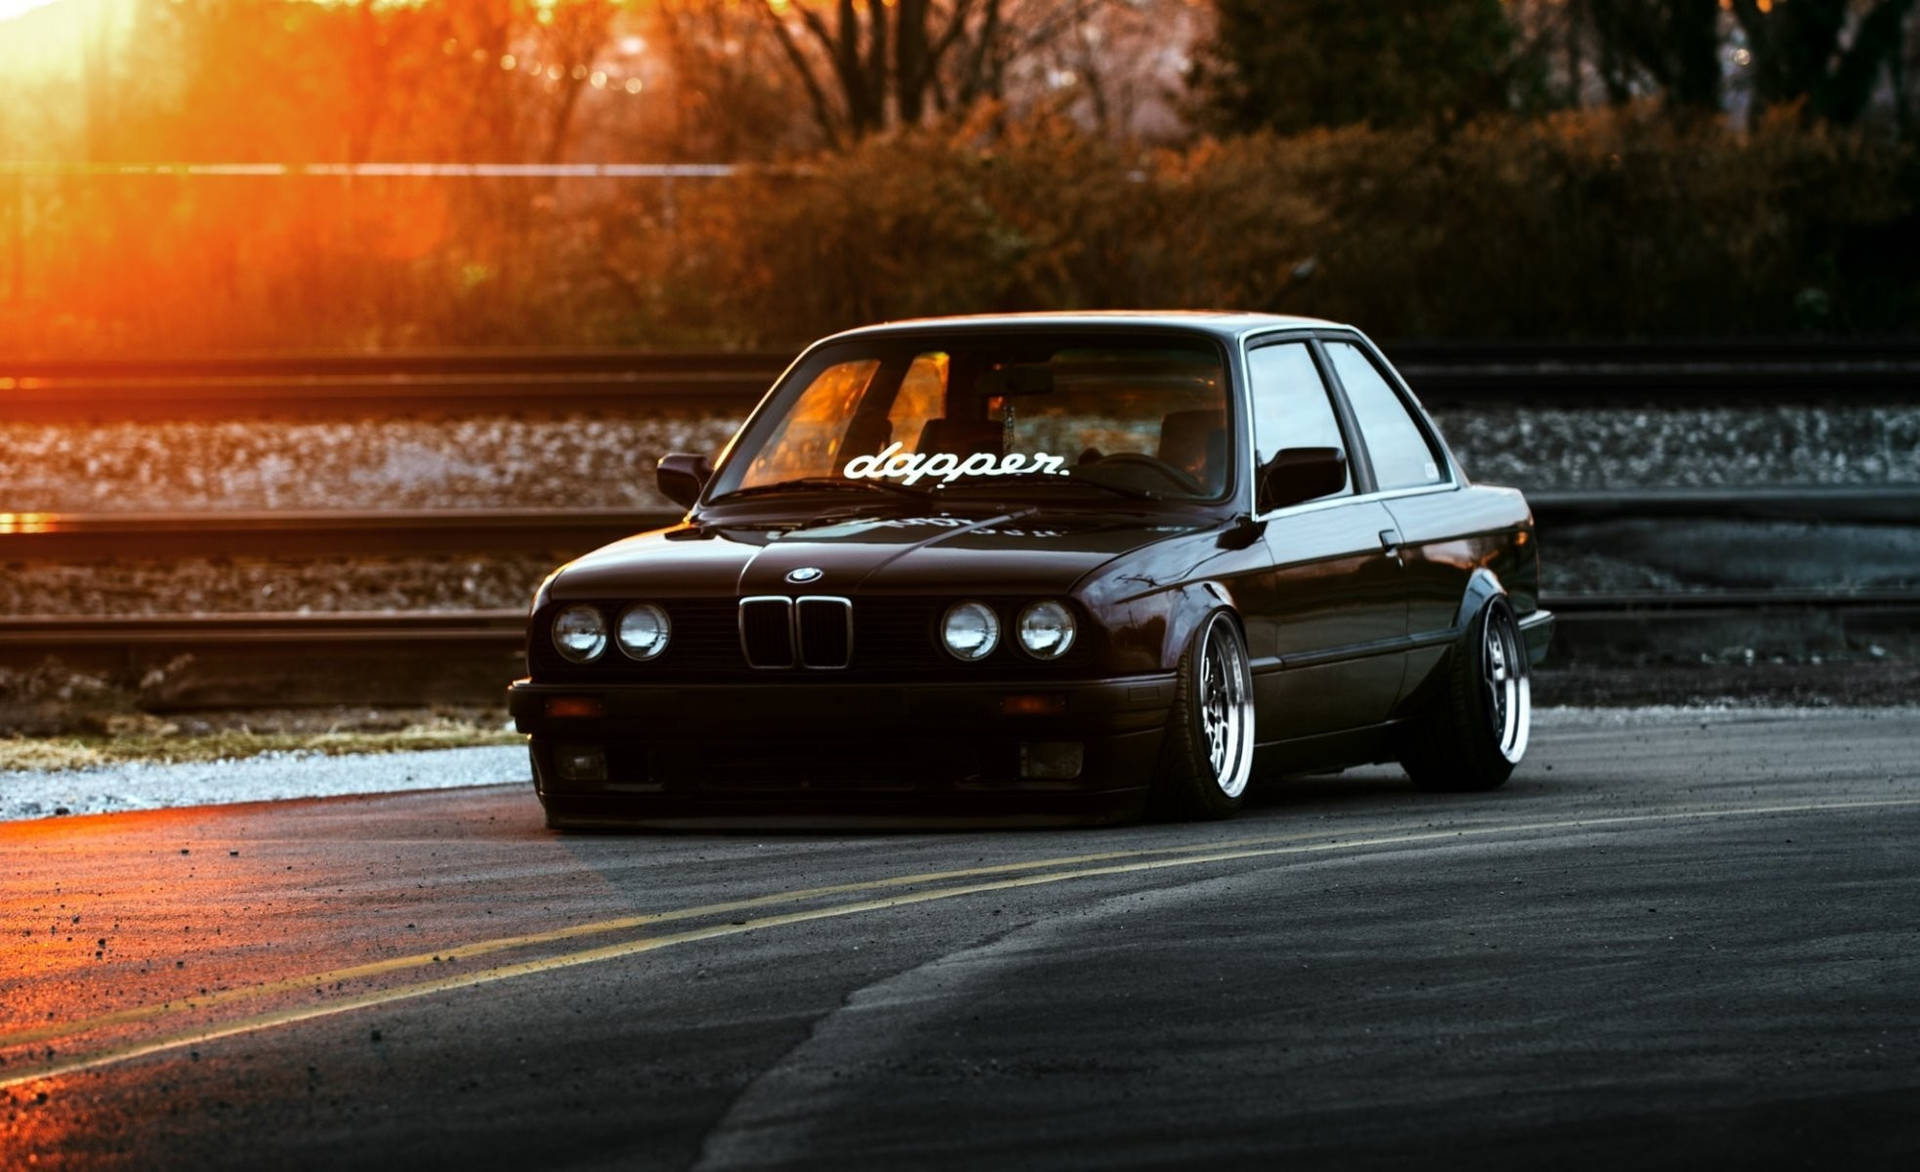 Luxurious Ride: Black Bmw Against A Dramatic Sky Background